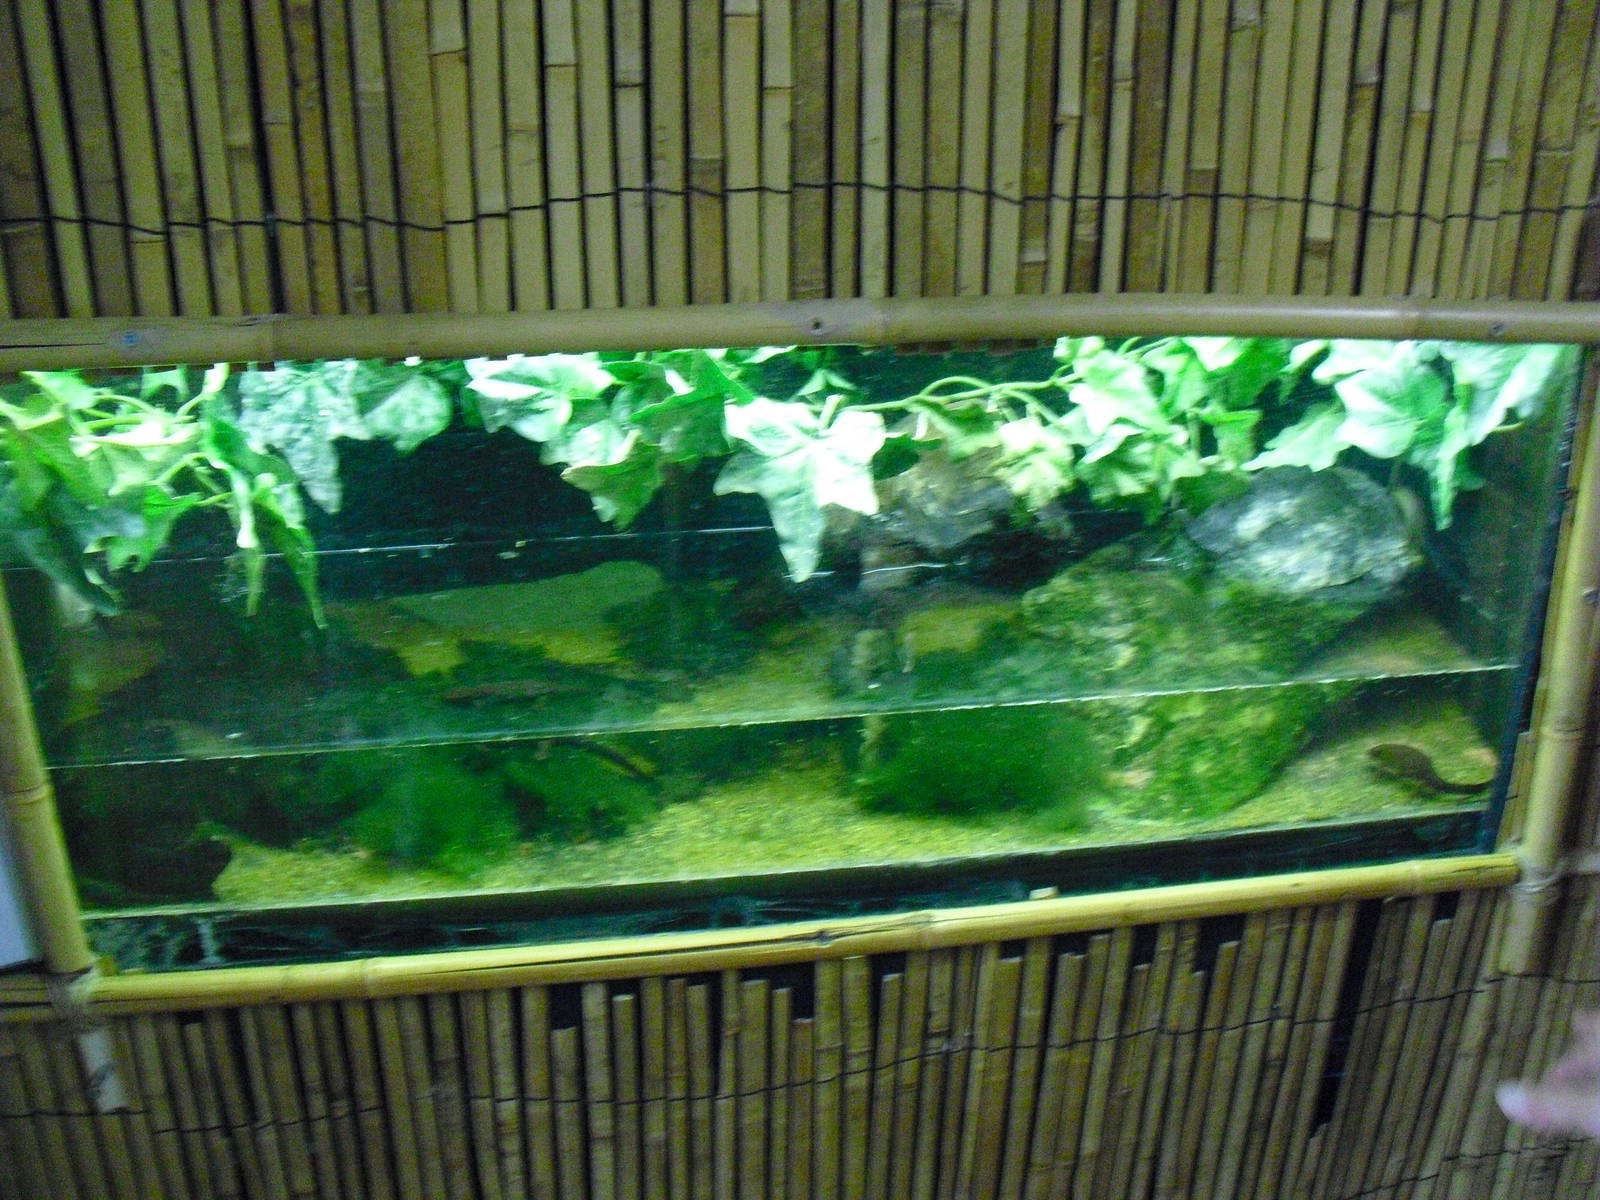 Japanese Fire Bellied Newt Tank 27 10 2011 Zoochat,Mojito Recipe Picture